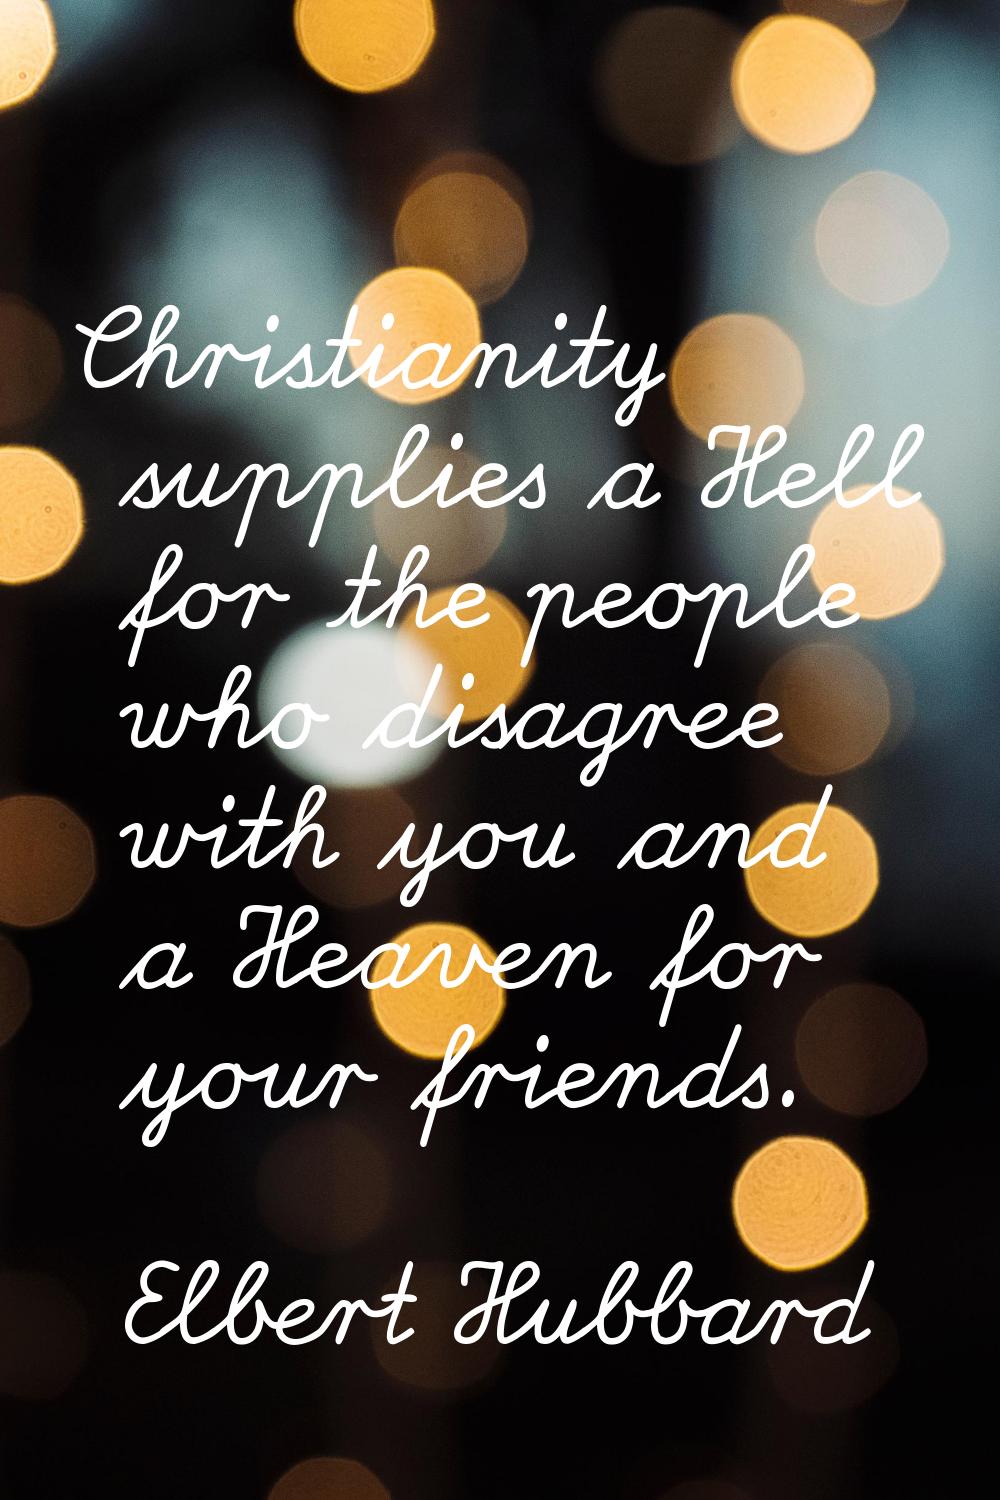 Christianity supplies a Hell for the people who disagree with you and a Heaven for your friends.